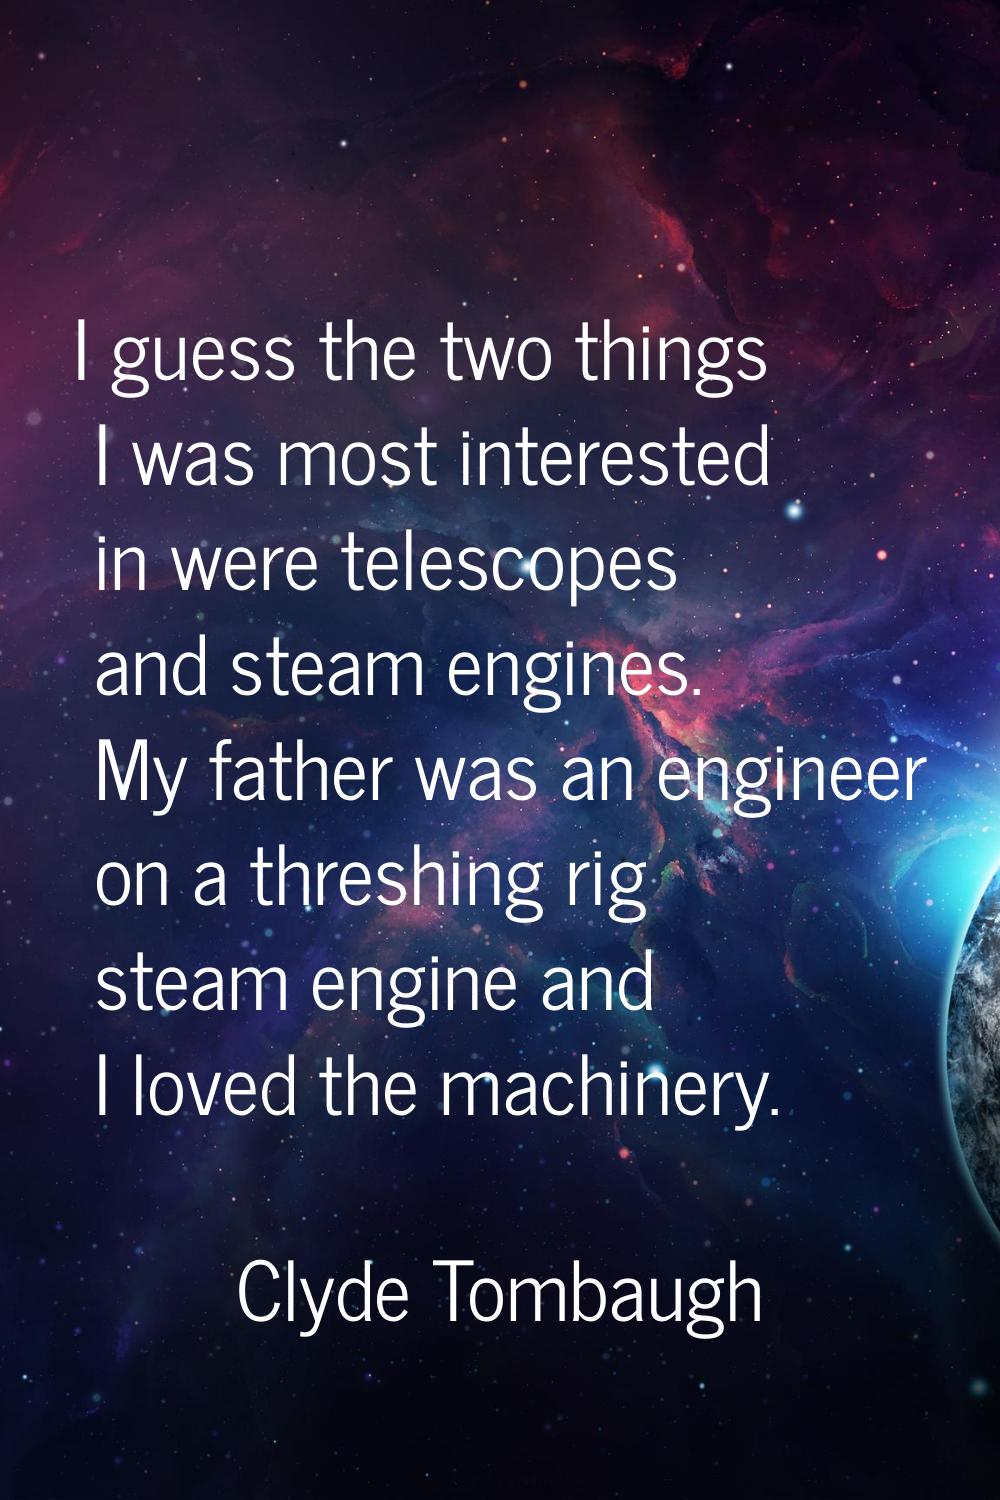 I guess the two things I was most interested in were telescopes and steam engines. My father was an